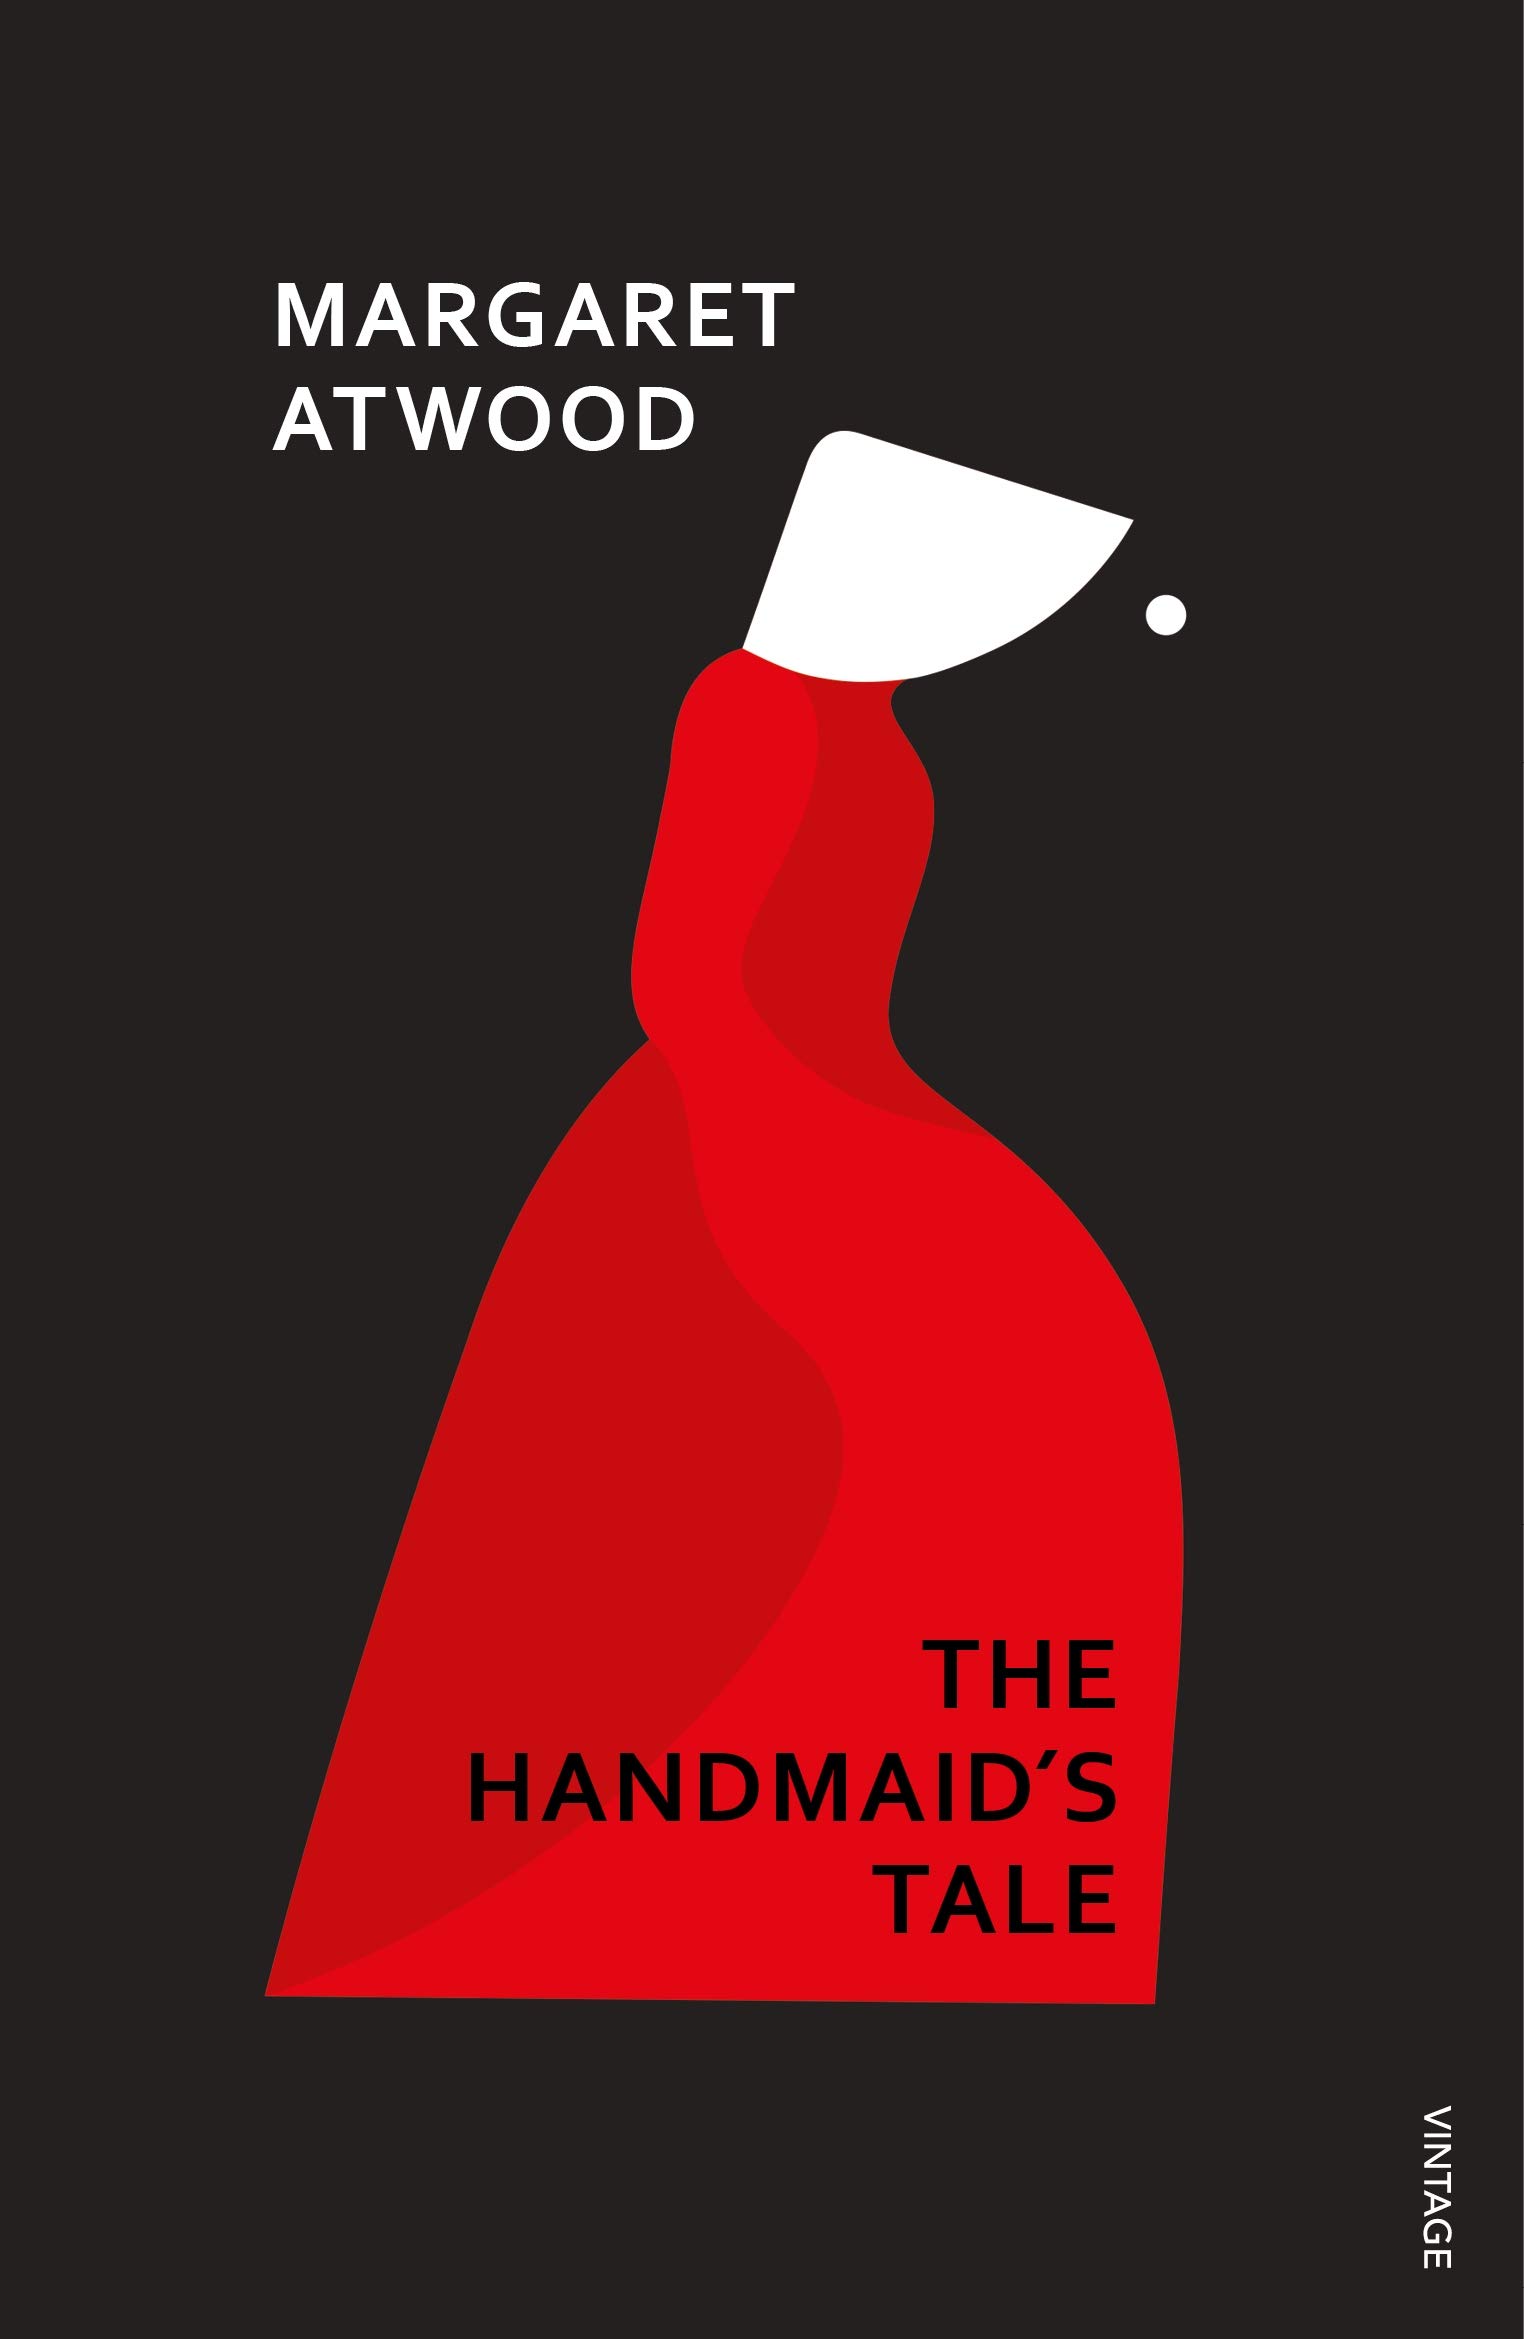 The Handmaid's Tale Paperback by Margaret Atwood